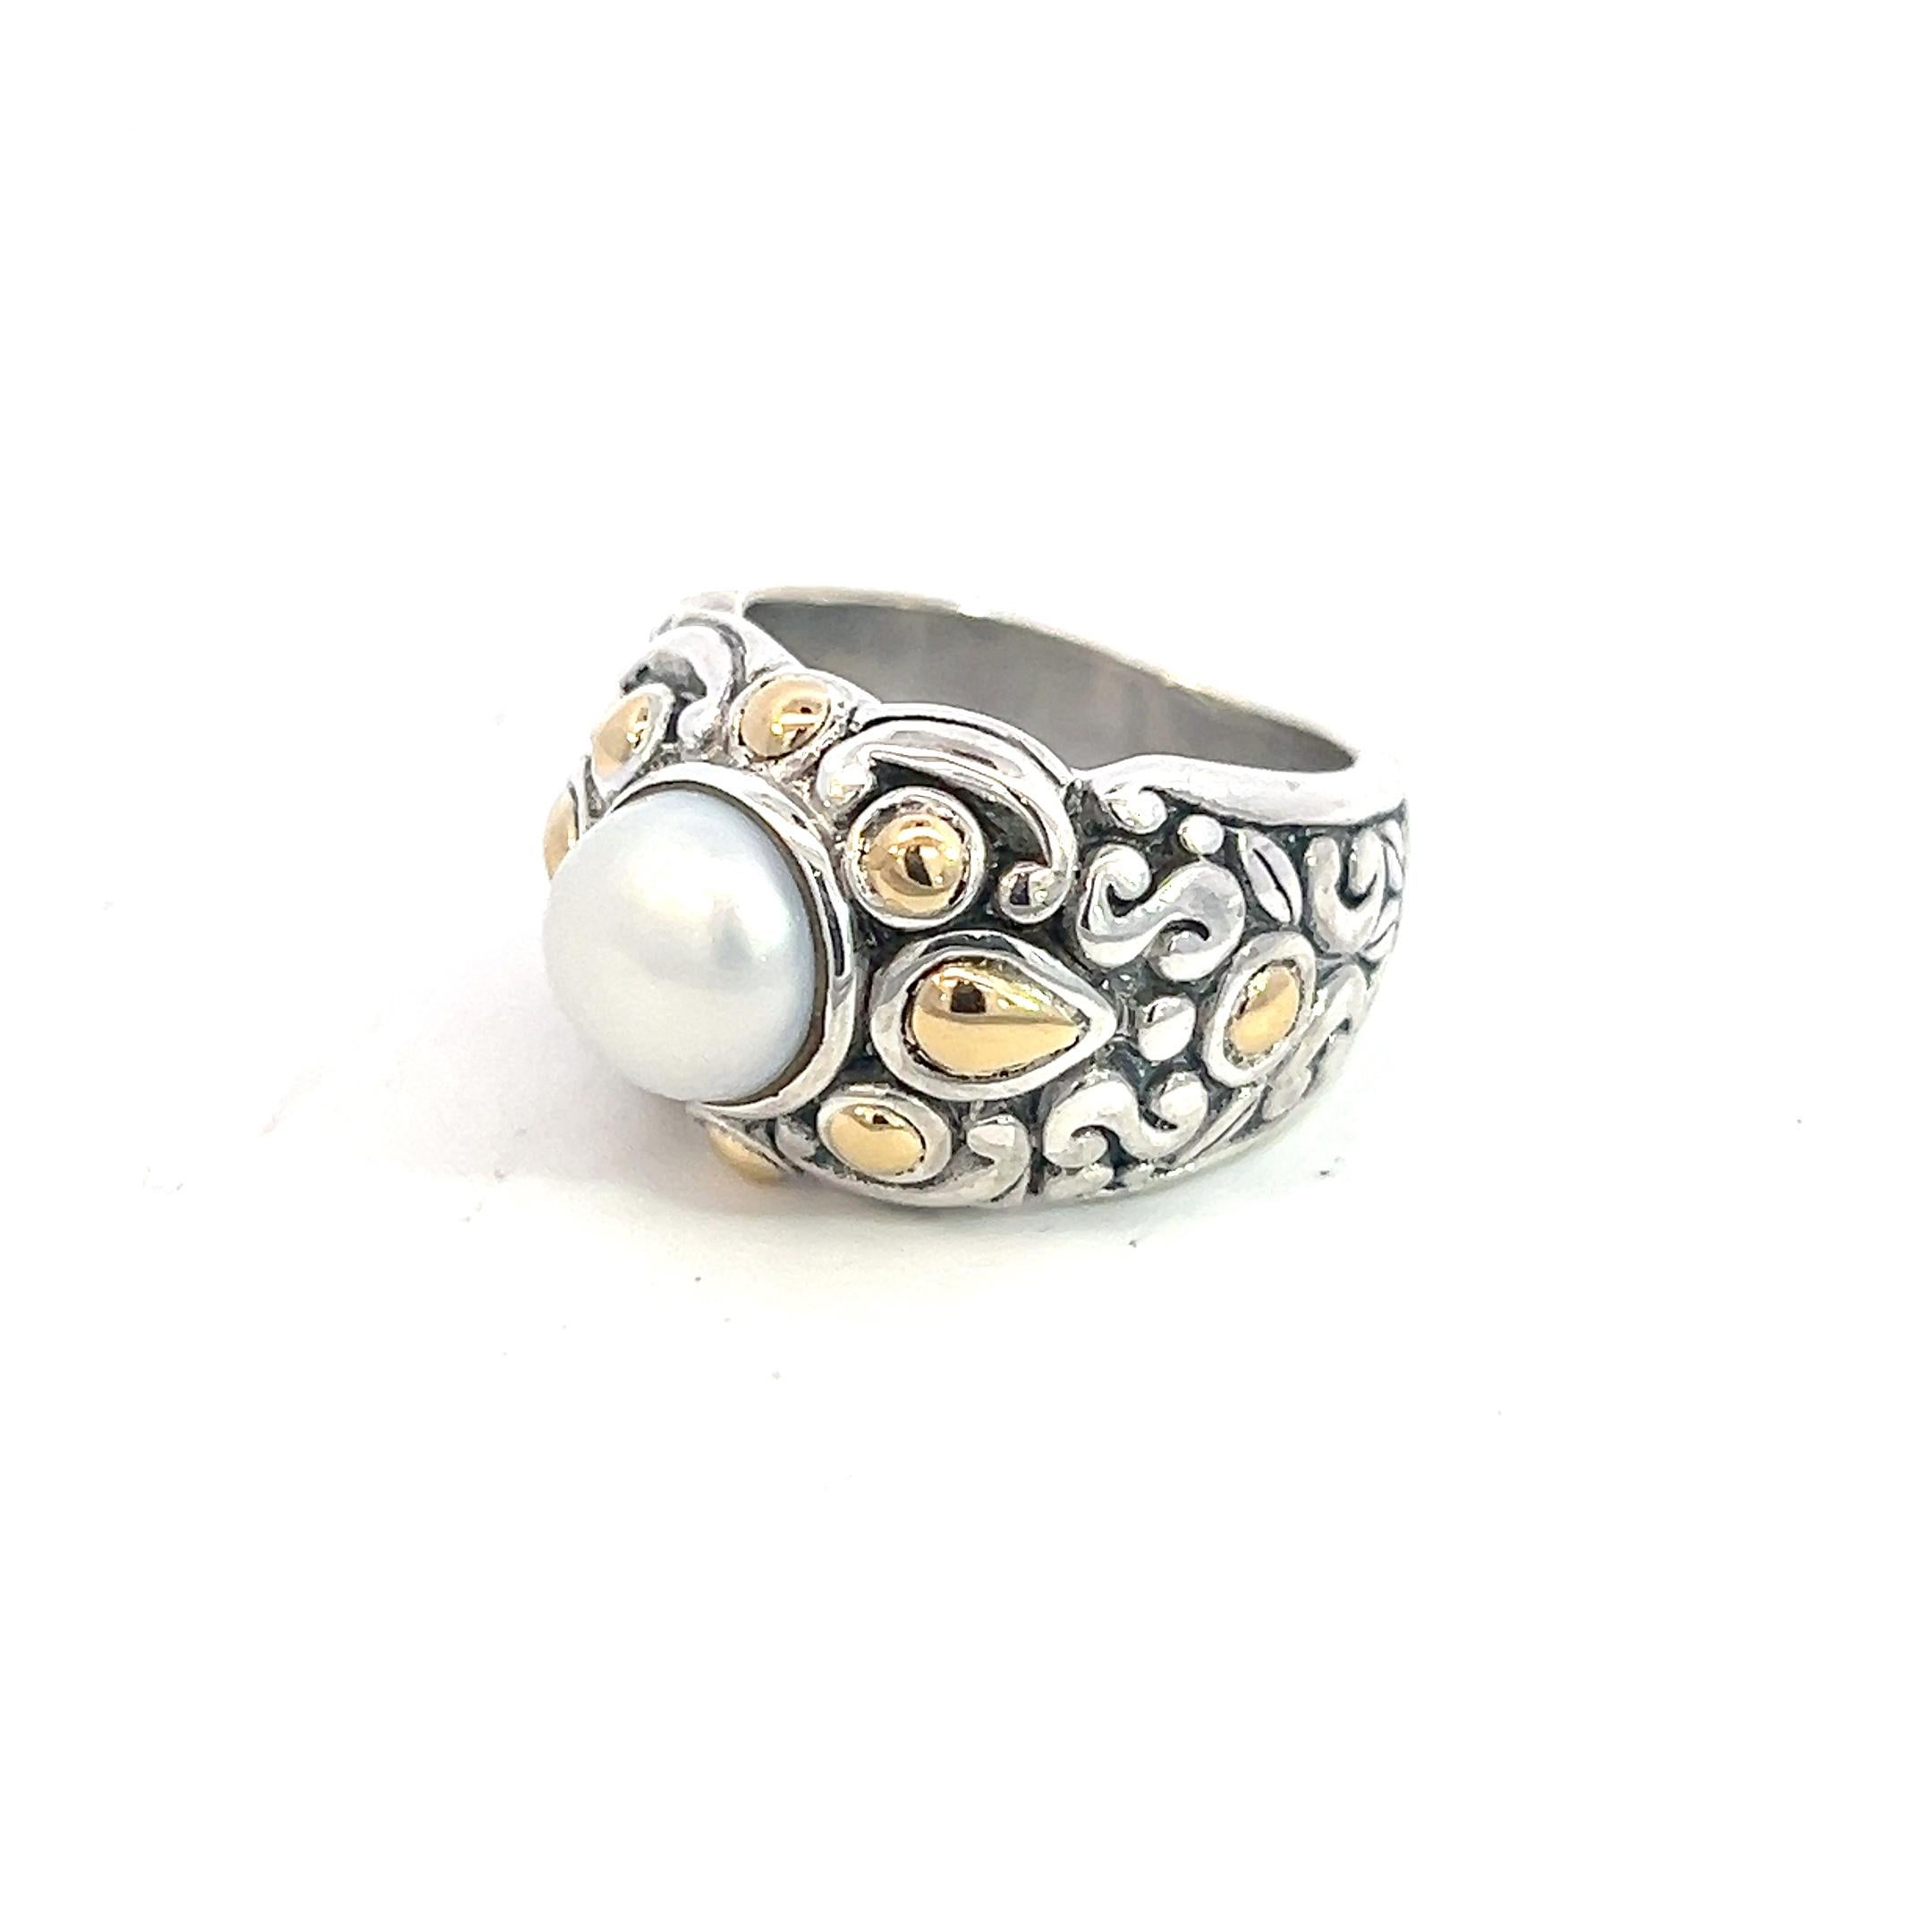 John Hardy Estate Pearl Ring Size 6 18k Gold + Silver JH77

TRUSTED SELLER SINCE 2002

PLEASE SEE OUR HUNDREDS OF POSITIVE FEEDBACKS FROM OUR CLIENTS!!

FREE SHIPPING!!

DETAILS
Stone: Pearl
Ring Size: 6
Weight: 12.4 Grams
Metal: 18k Yellow Gold +